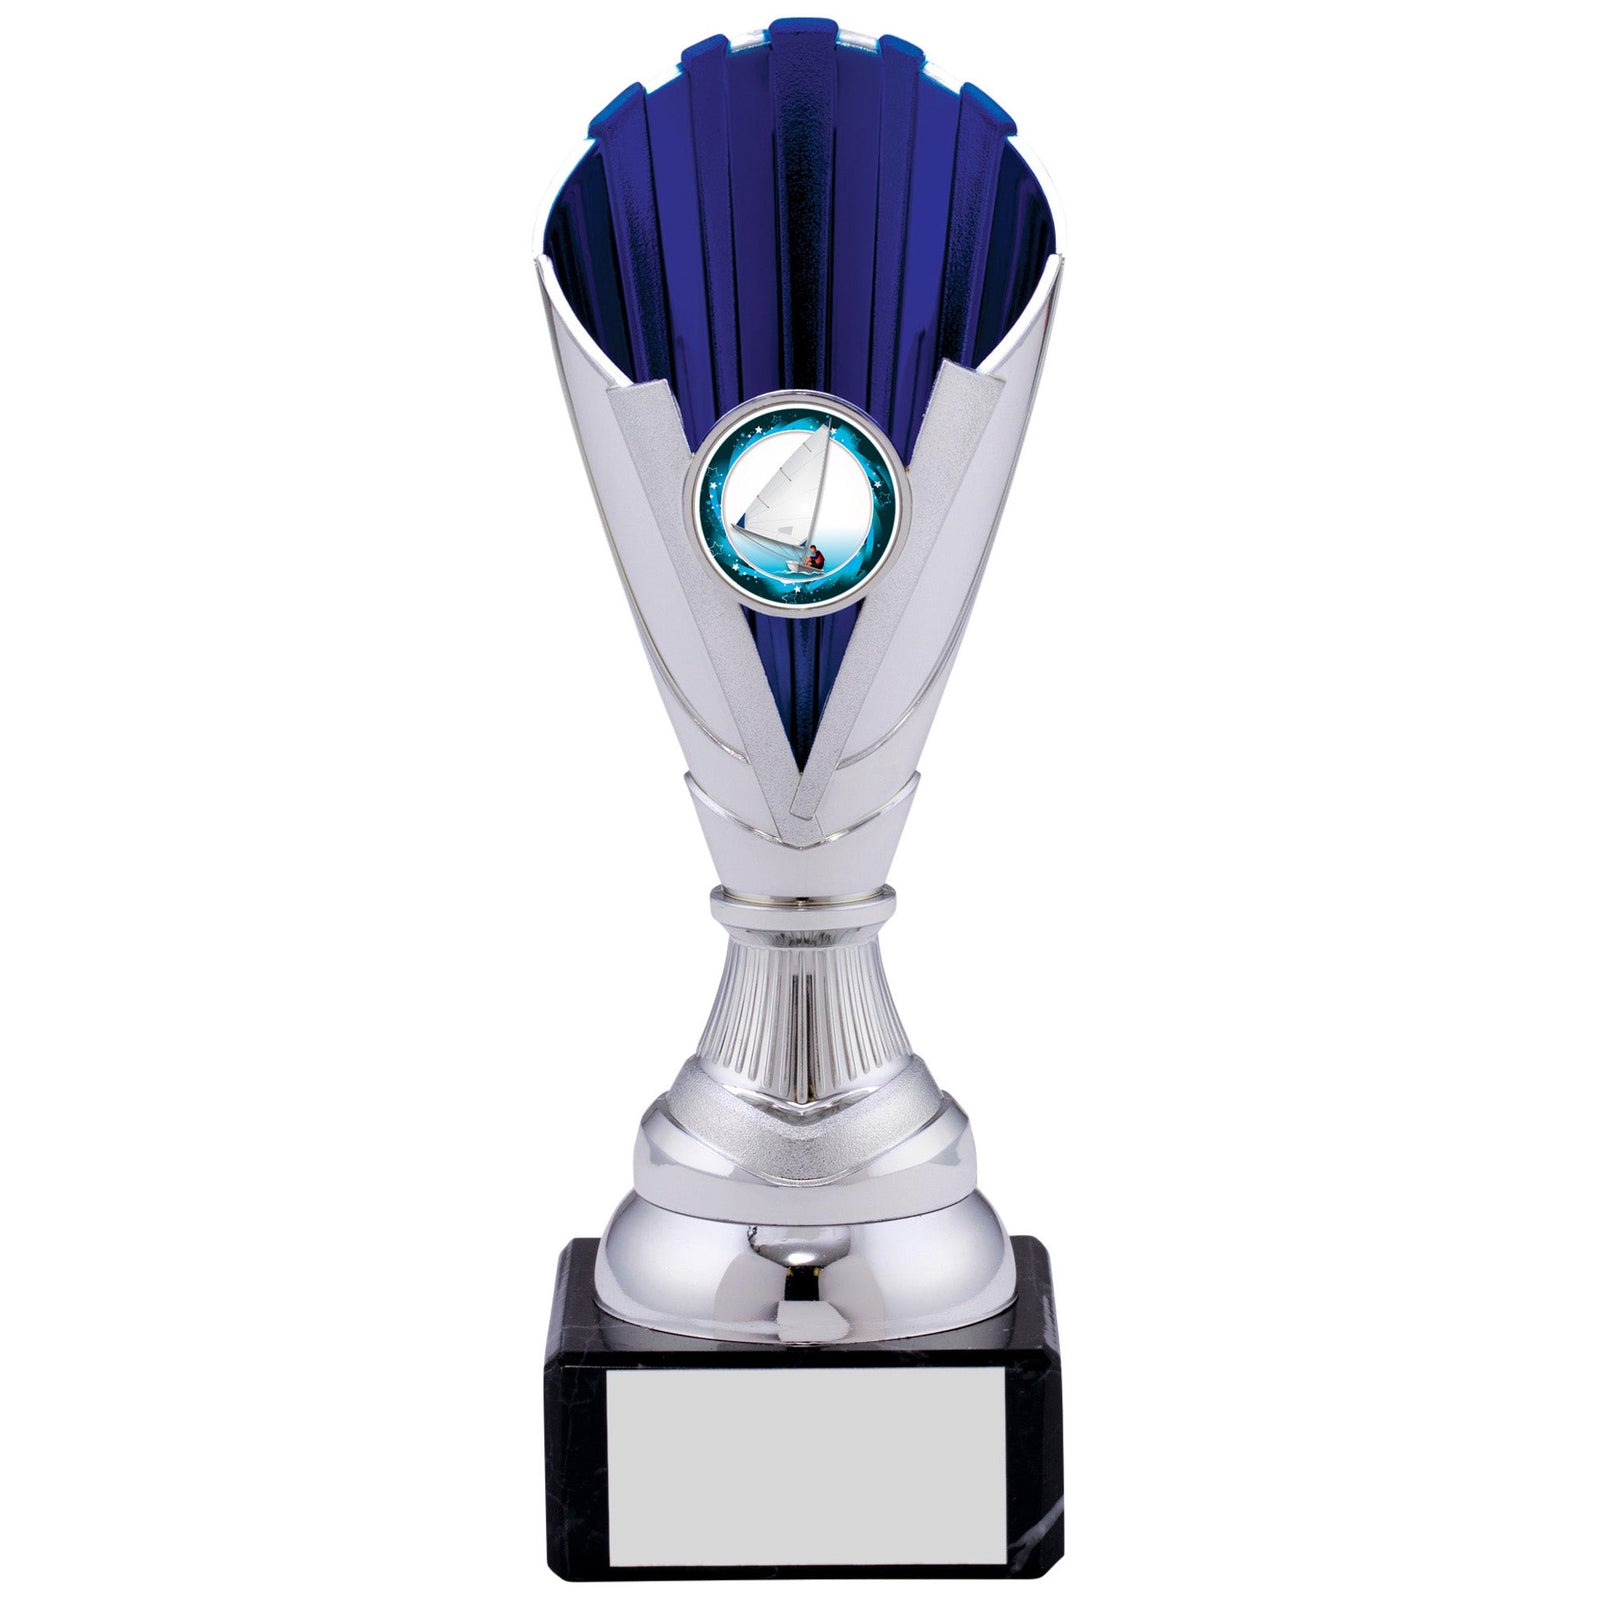 Silver and Blue Plastic Trophy Cup on Black Marble Base